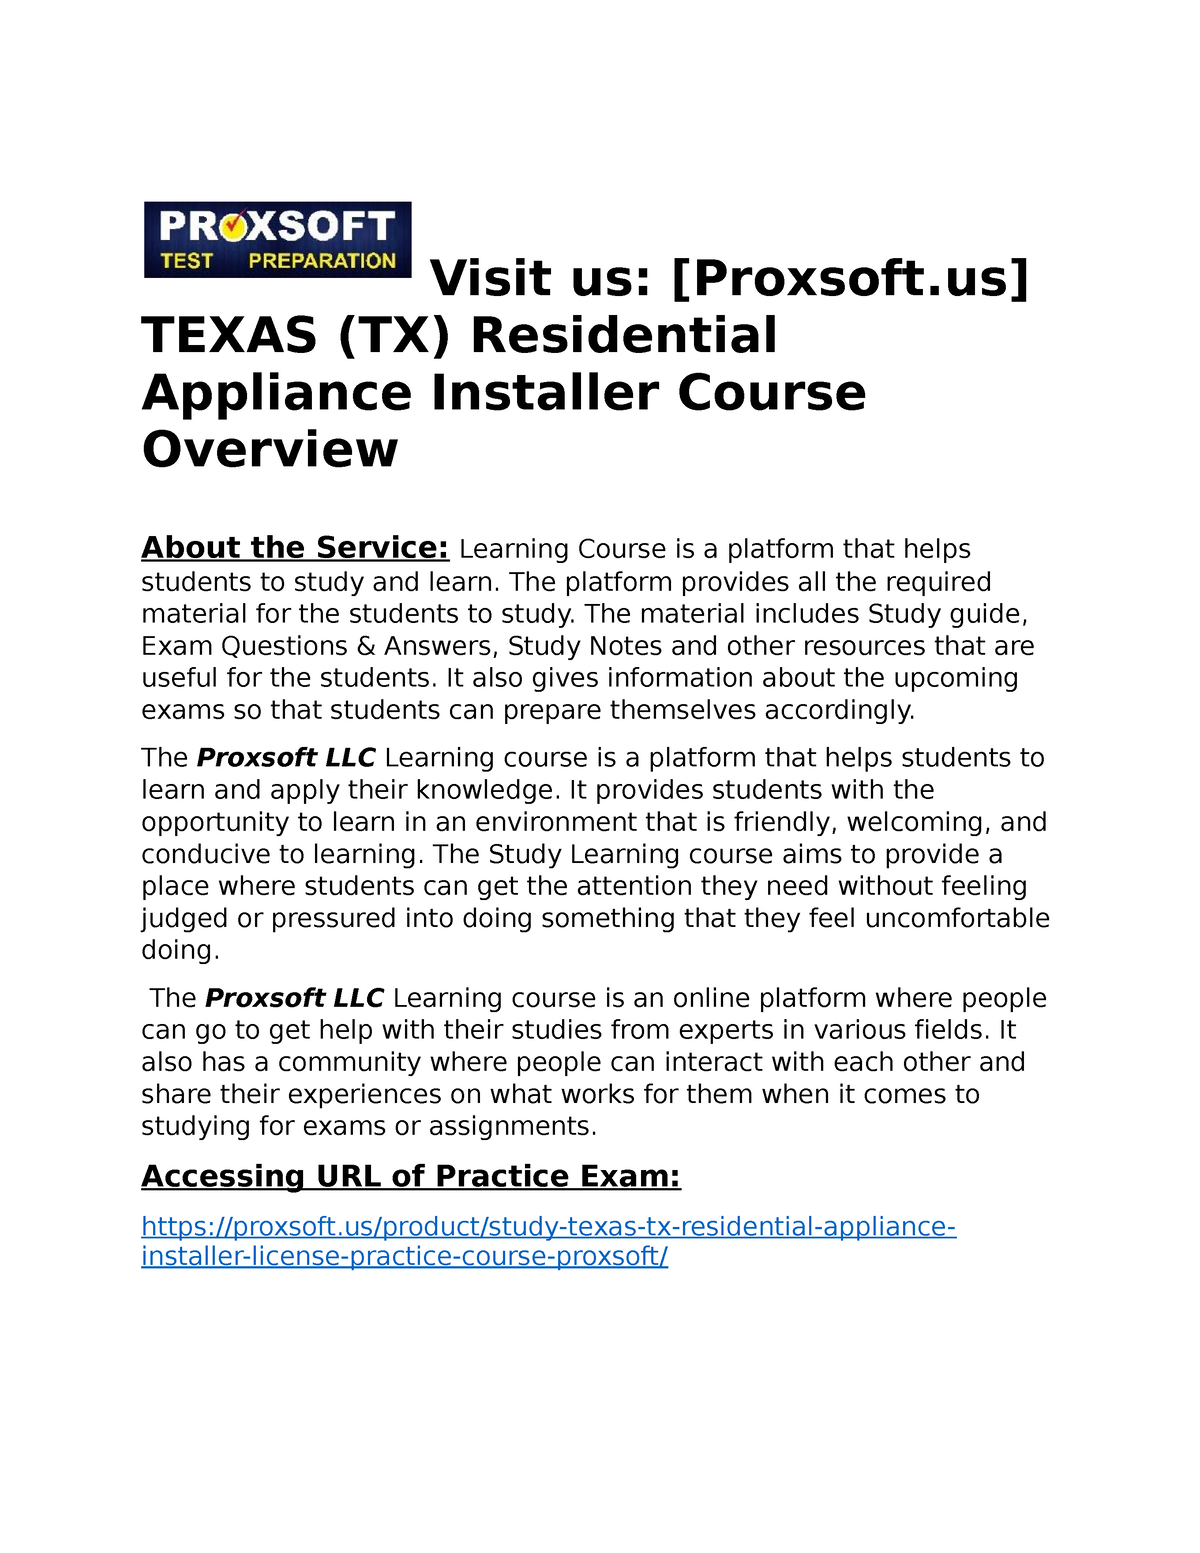 Vermont residential appliance installer license prep class free download